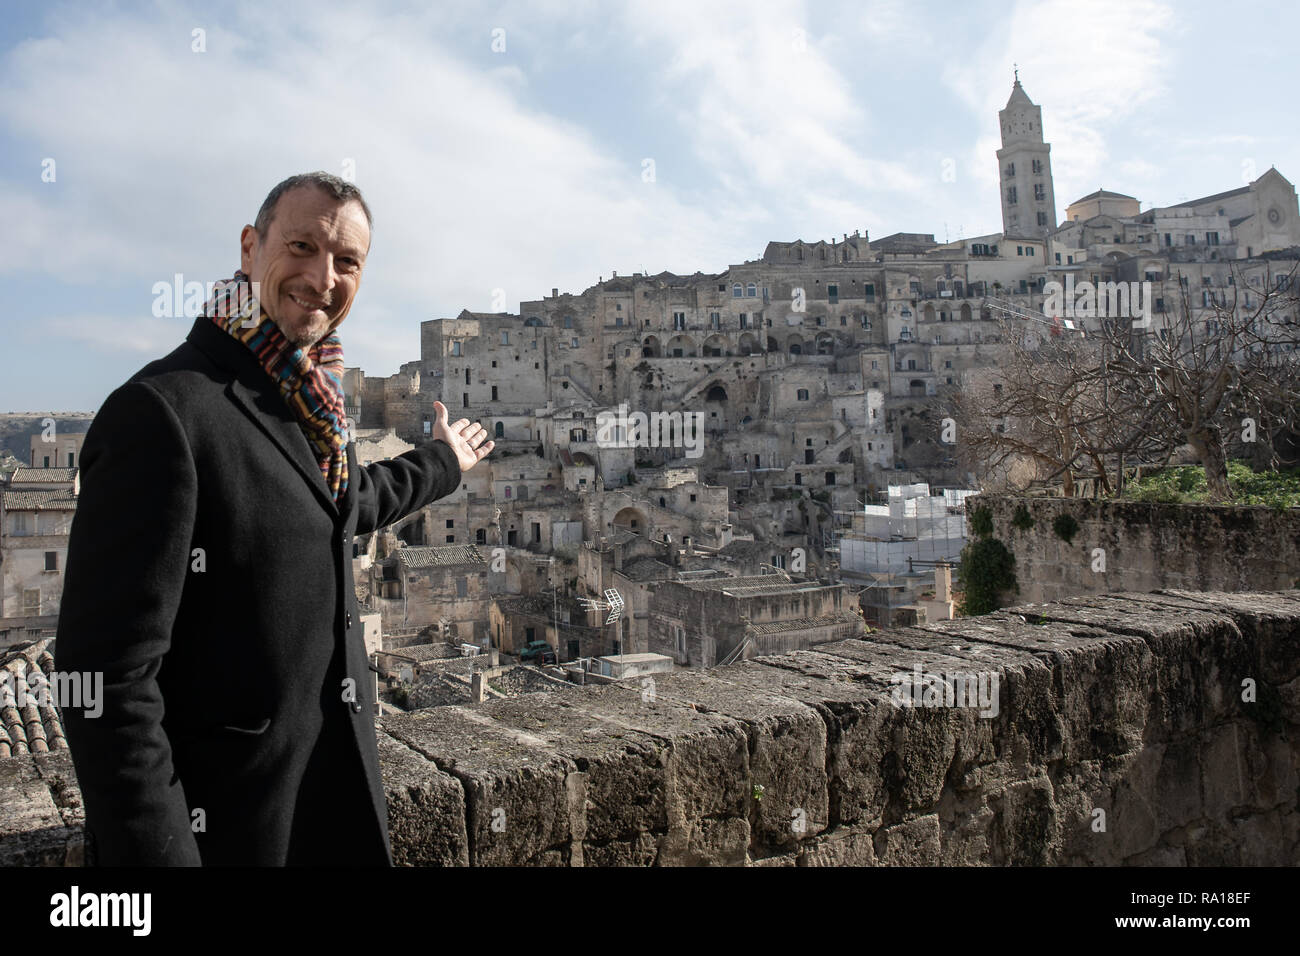 Amadeus presenter of the rai 1 television program of the new year "l'anno  che verrà" seen indicating and looking at the matera stones before the  press conference Stock Photo - Alamy